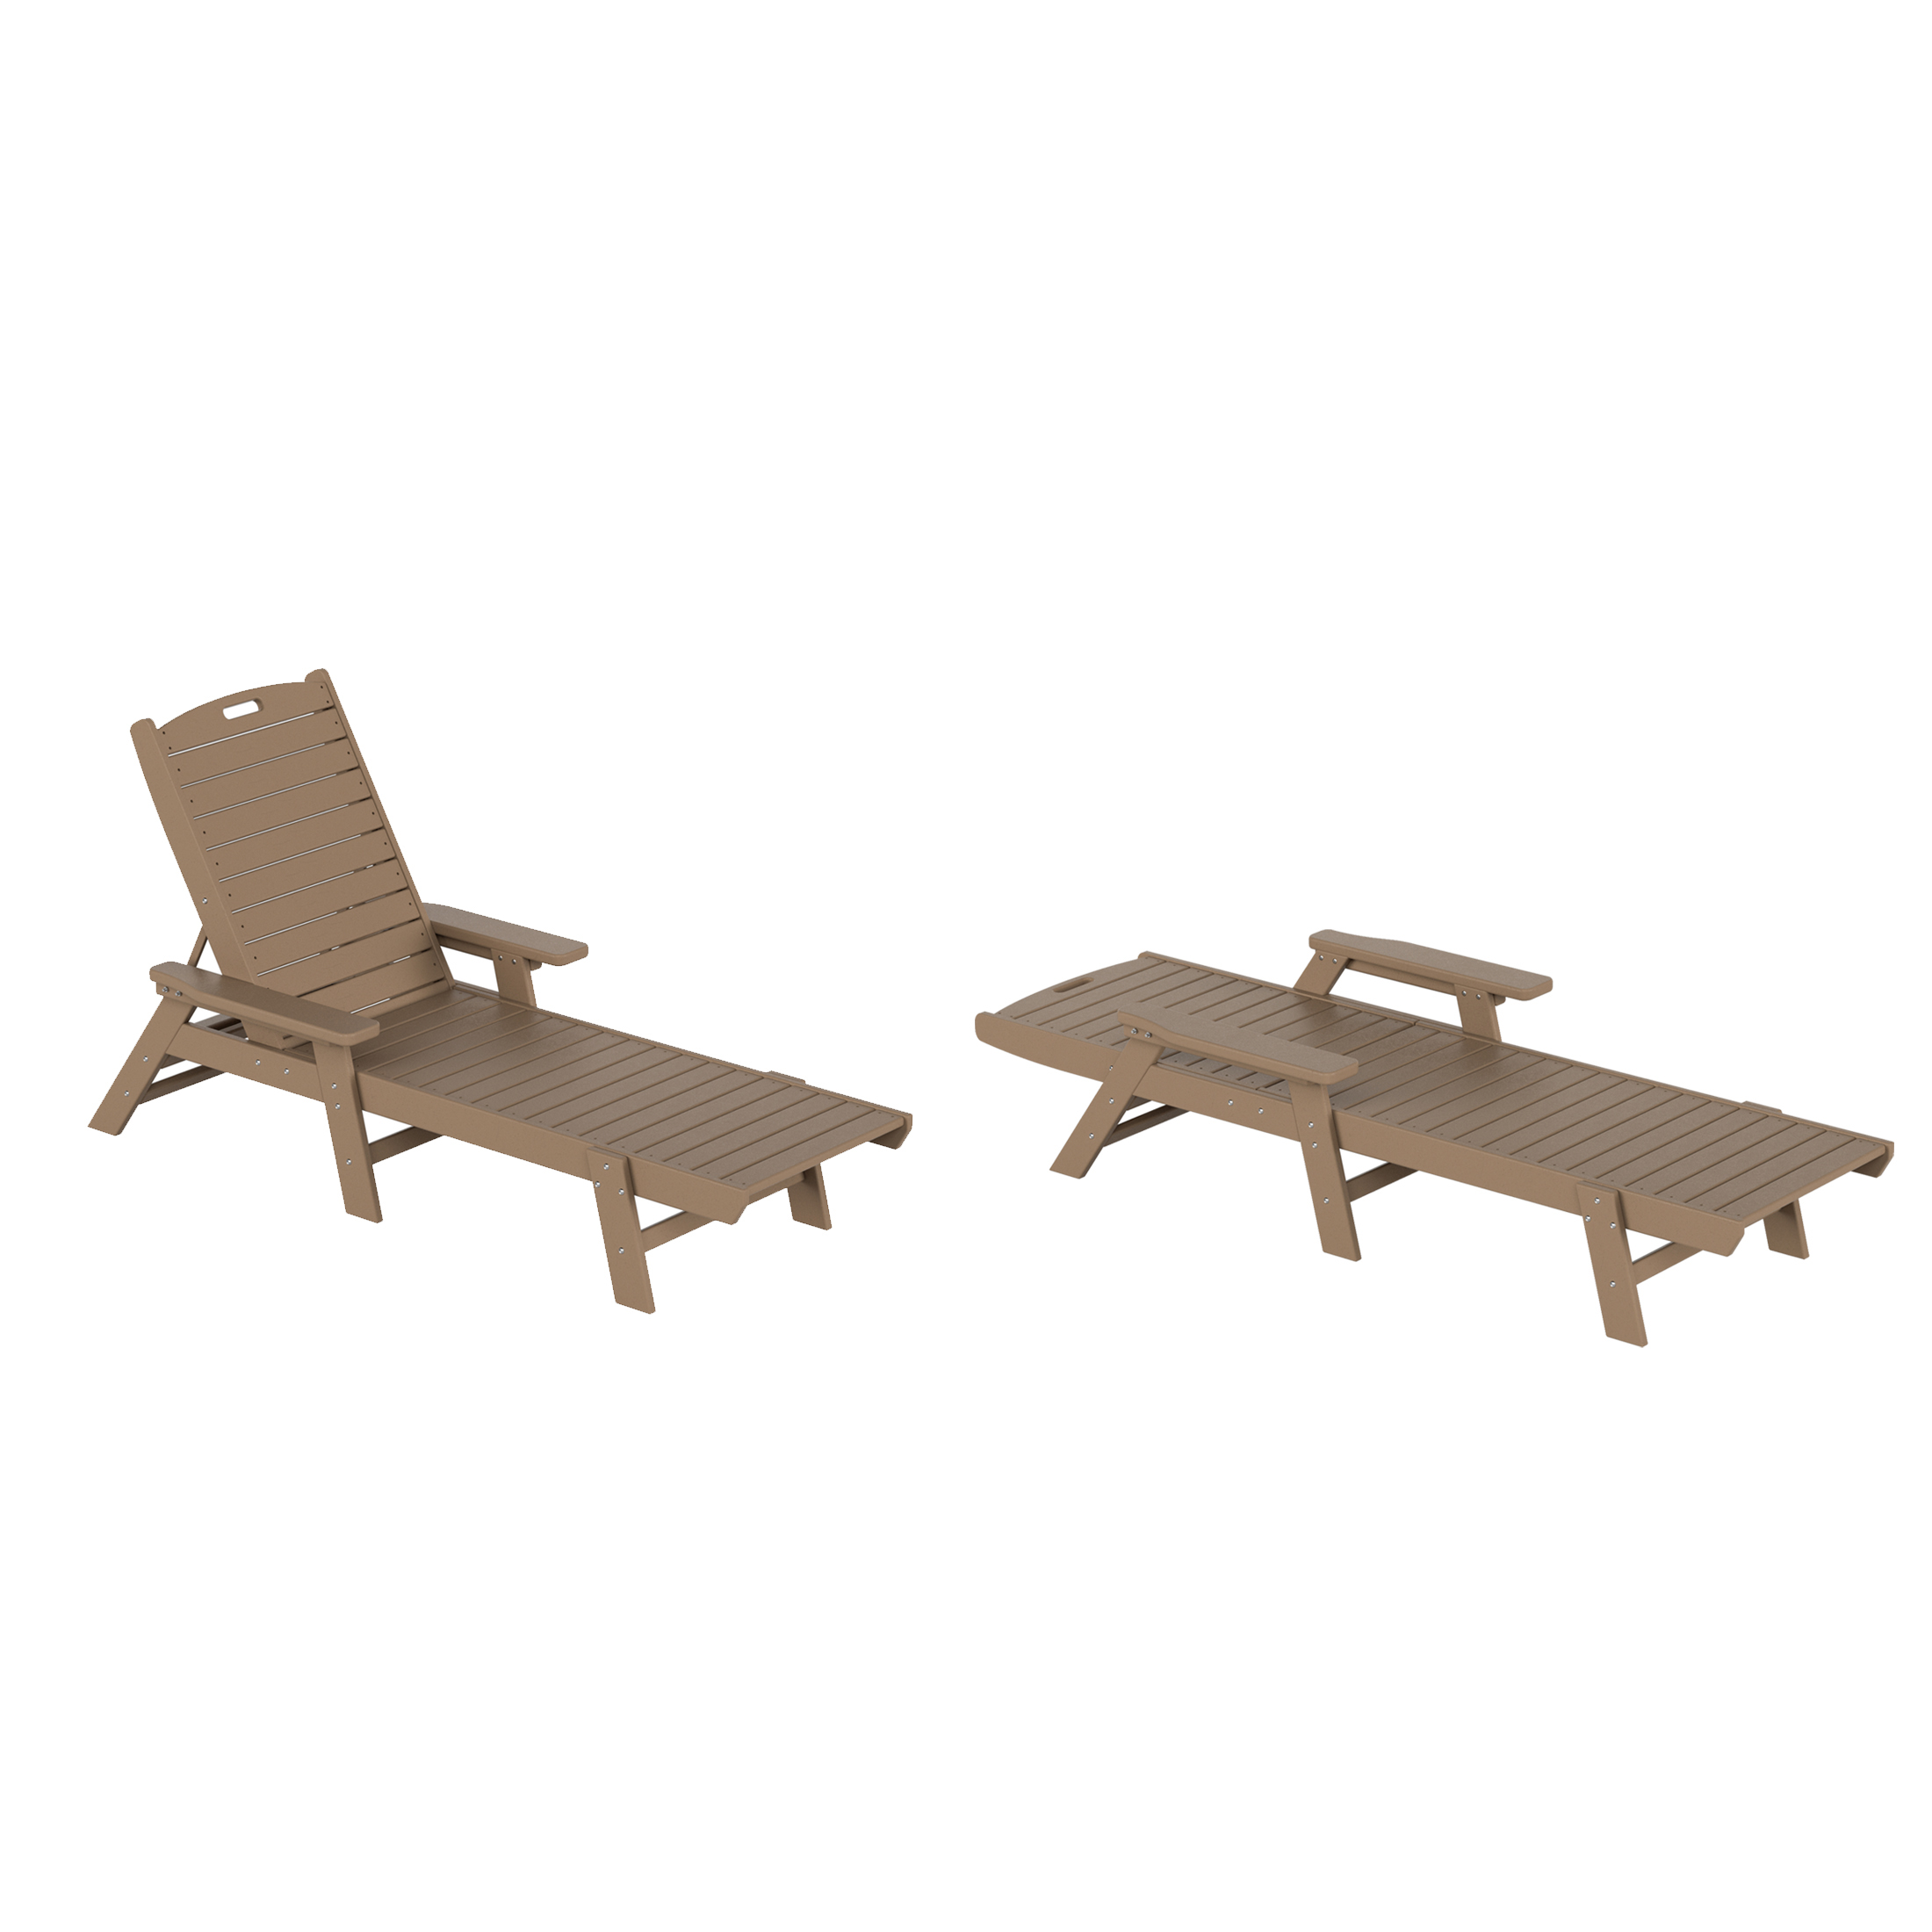 GARDEN Set of 2 Patio Outdoor Chaise Lounge Chair, Weathered Wood - image 2 of 8